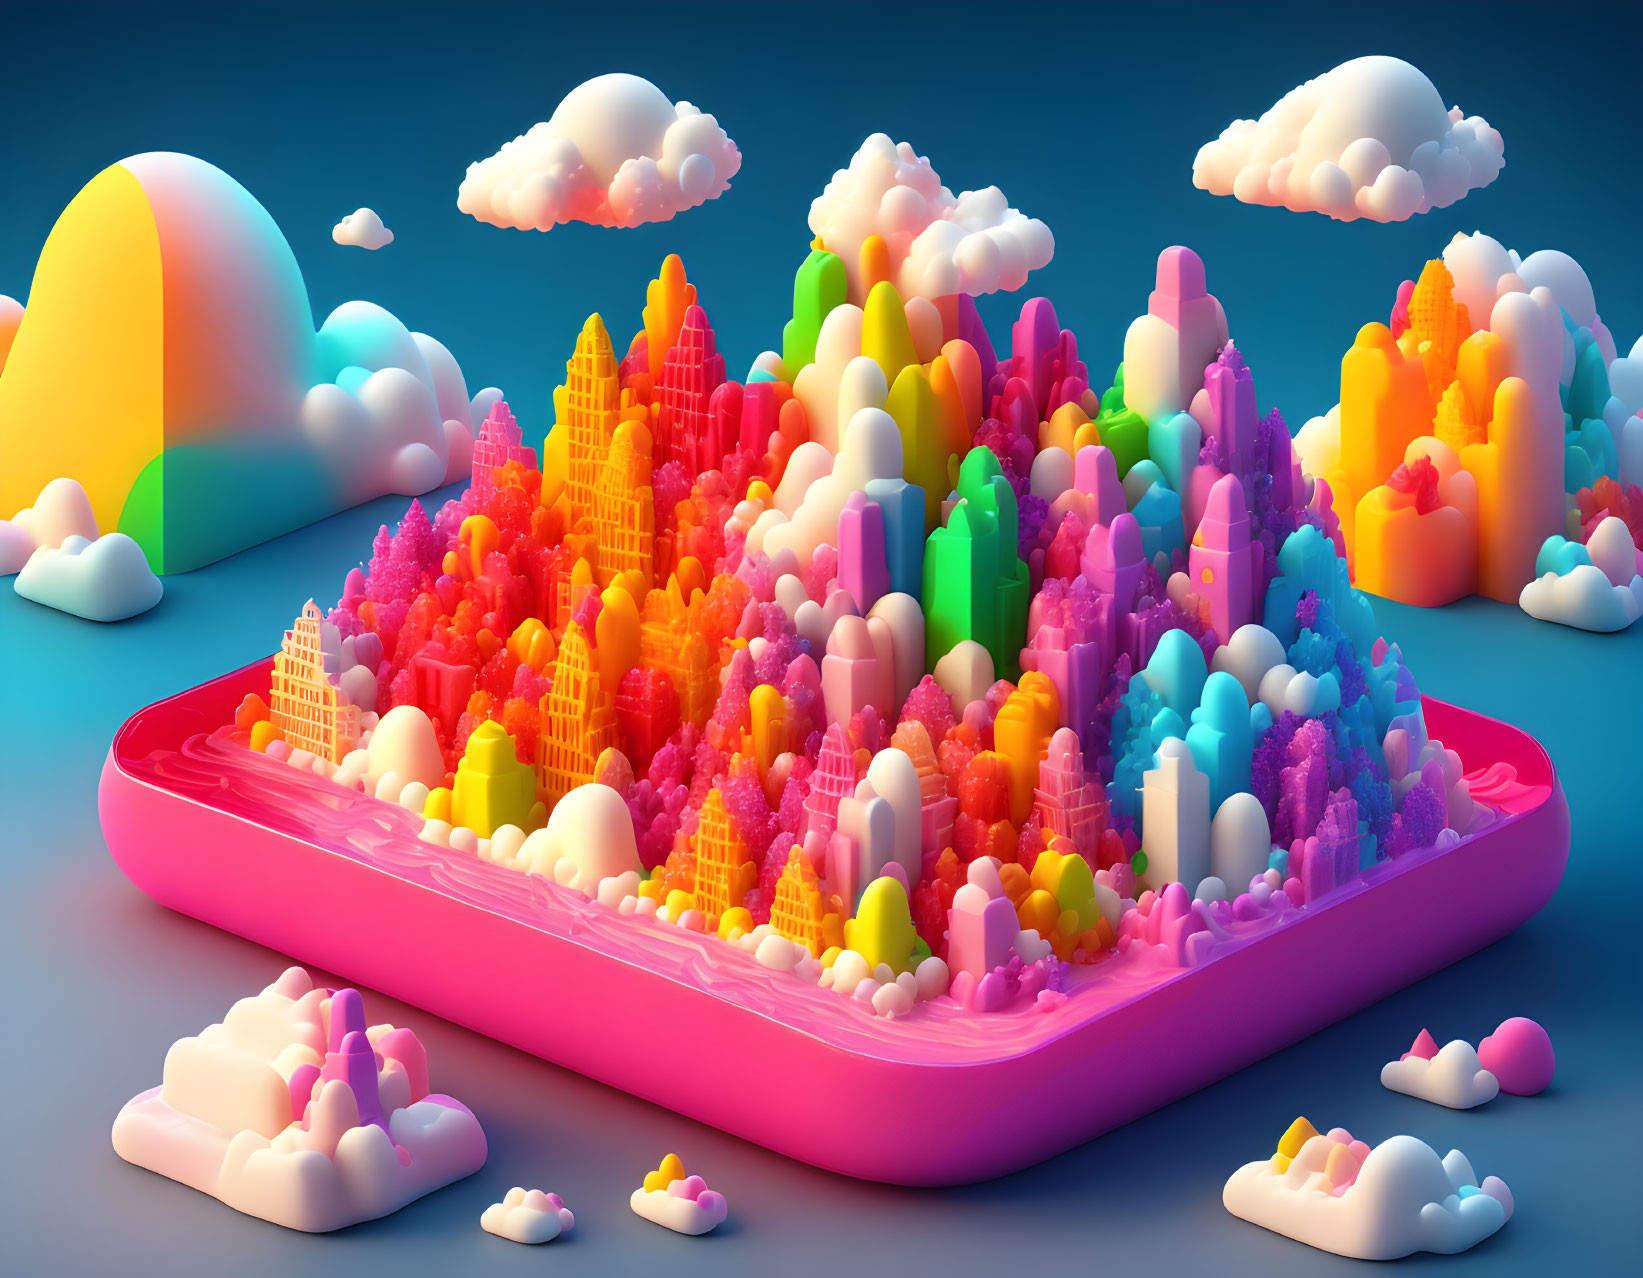 Colorful 3D digital art: Cityscape with crayon skyscrapers on pink platform.